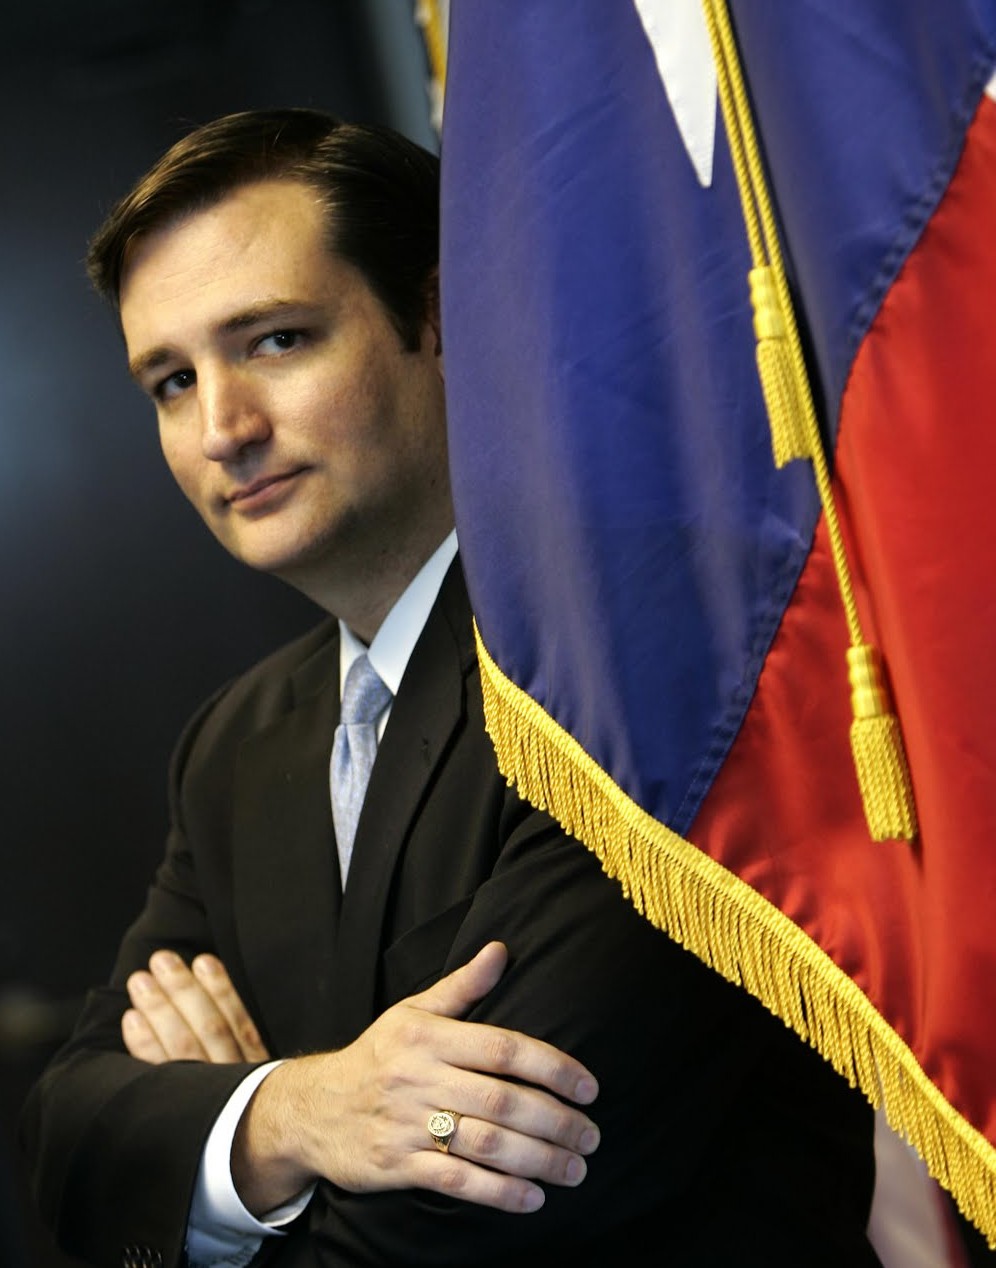 Ted Cruz on Your World with Neil Cavuto